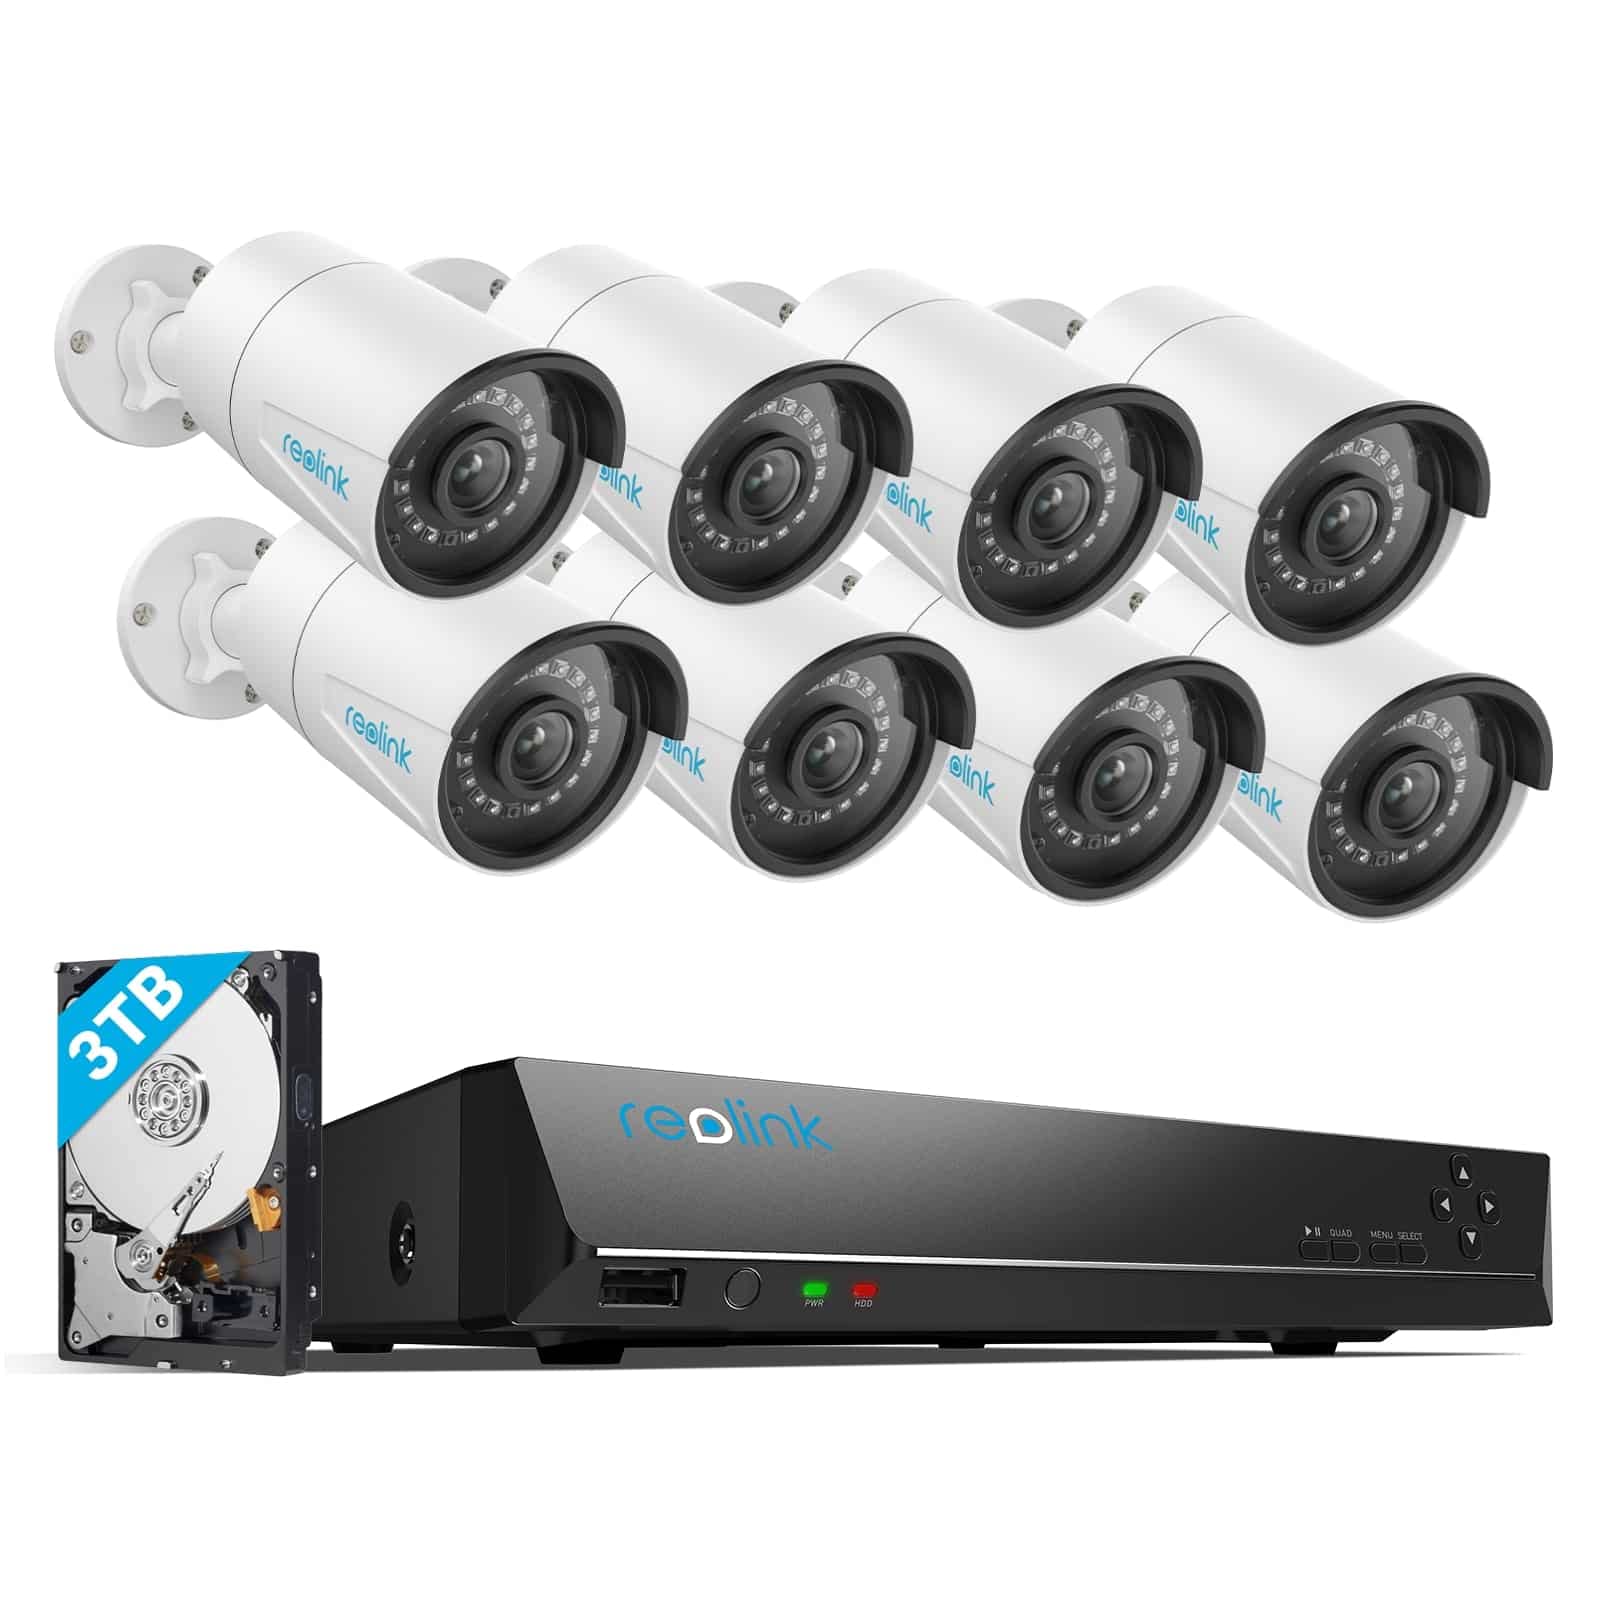 SmartTechShopping REOLINK 16CH 5MP Home Security Camera System, 8pcs Wired 5MP Outdoor PoE IP Cameras with Person Vehicle Detection, 4K 16CH NVR with 3TB HDD for 24-7 Recording, RLK16-410B8-5MP